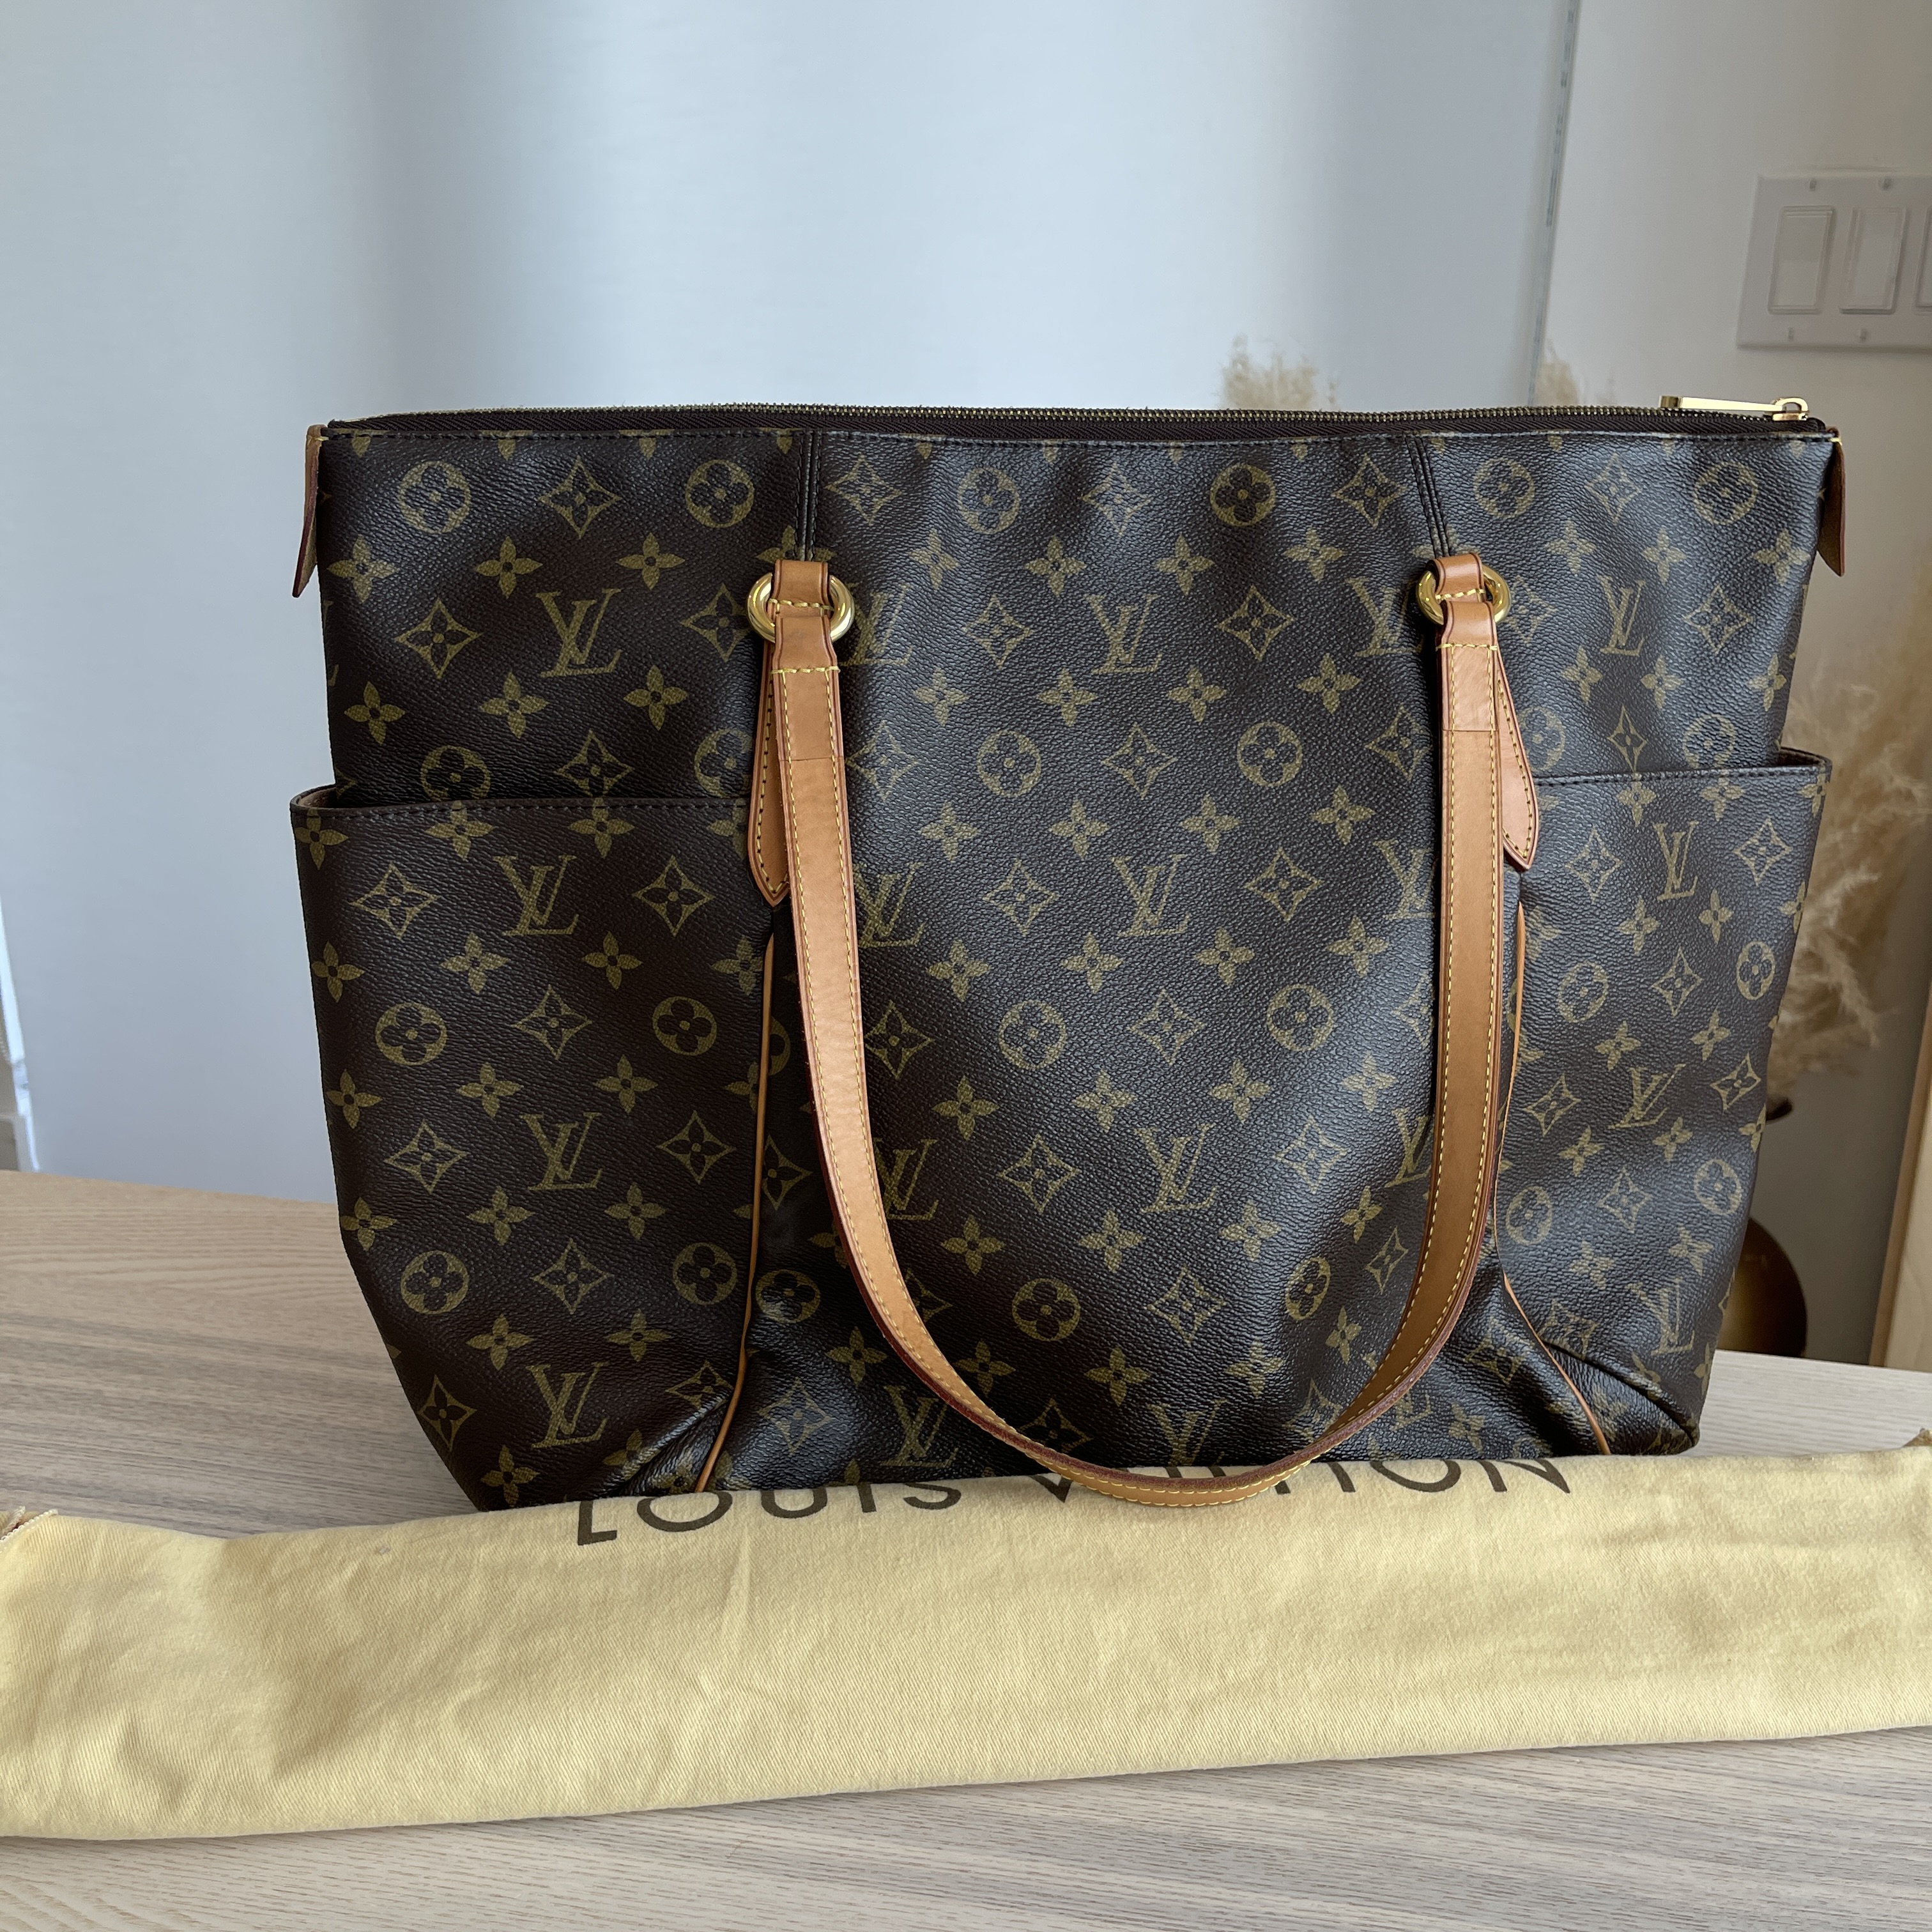 AUTHENTIC LV LOUIS VUITTON TOTALLY GM MONOGRAM BAG for Sale in